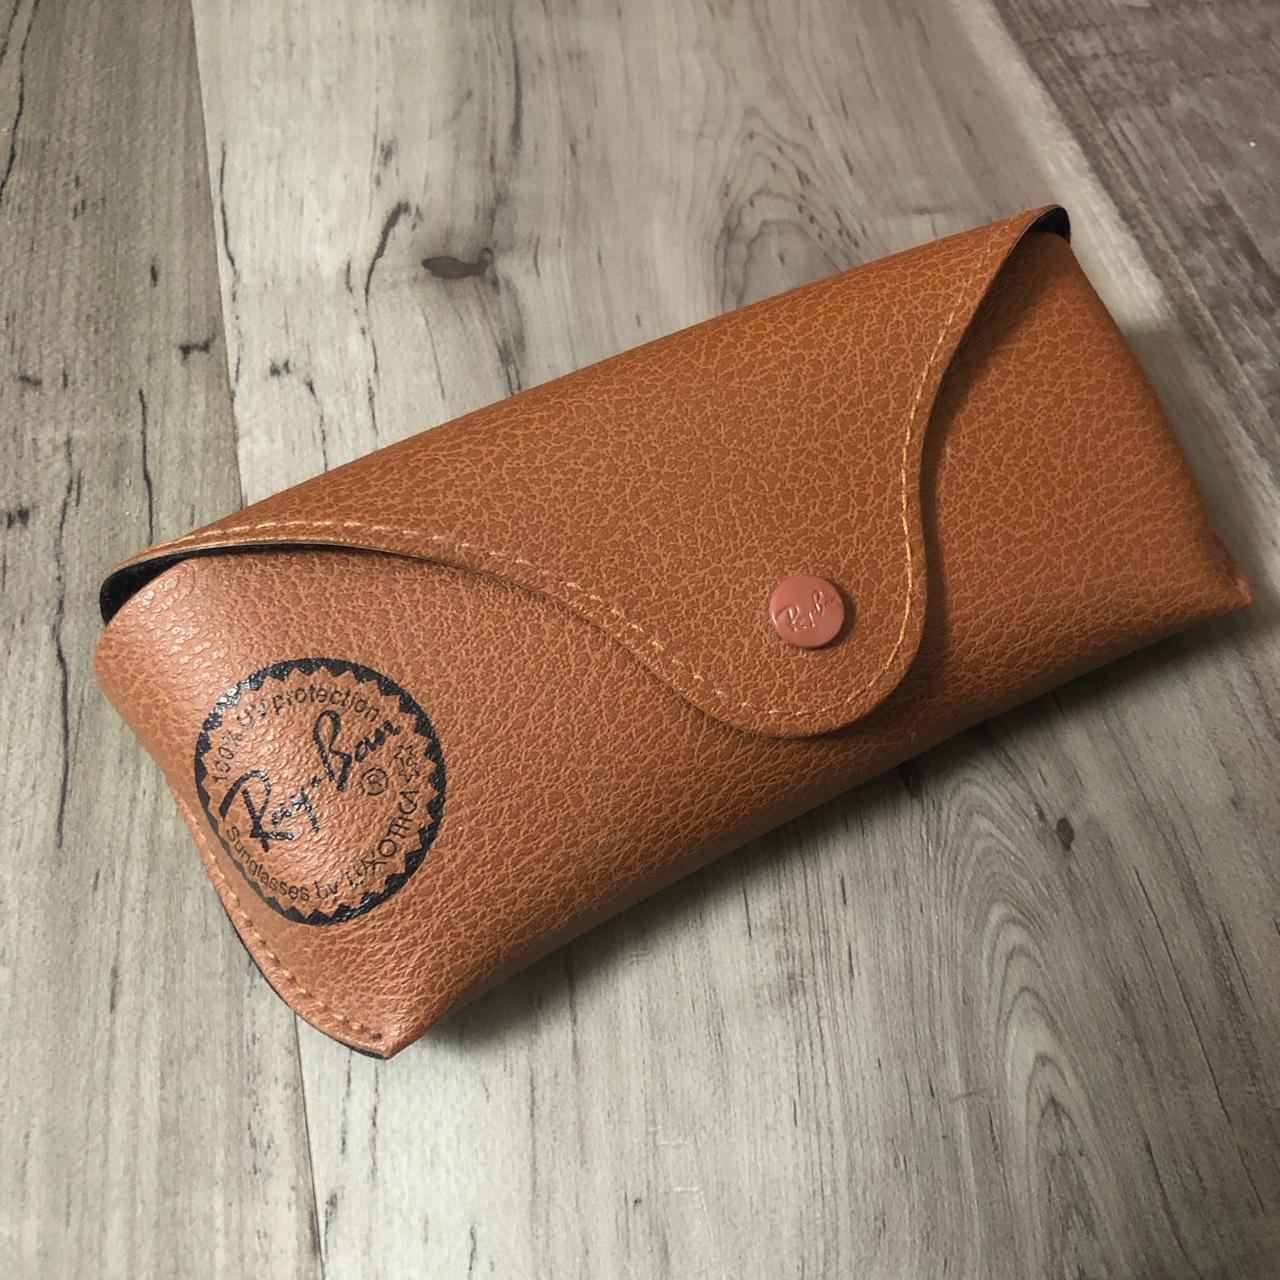 Ray-Ban Women's Tan and Brown Accessory | Depop